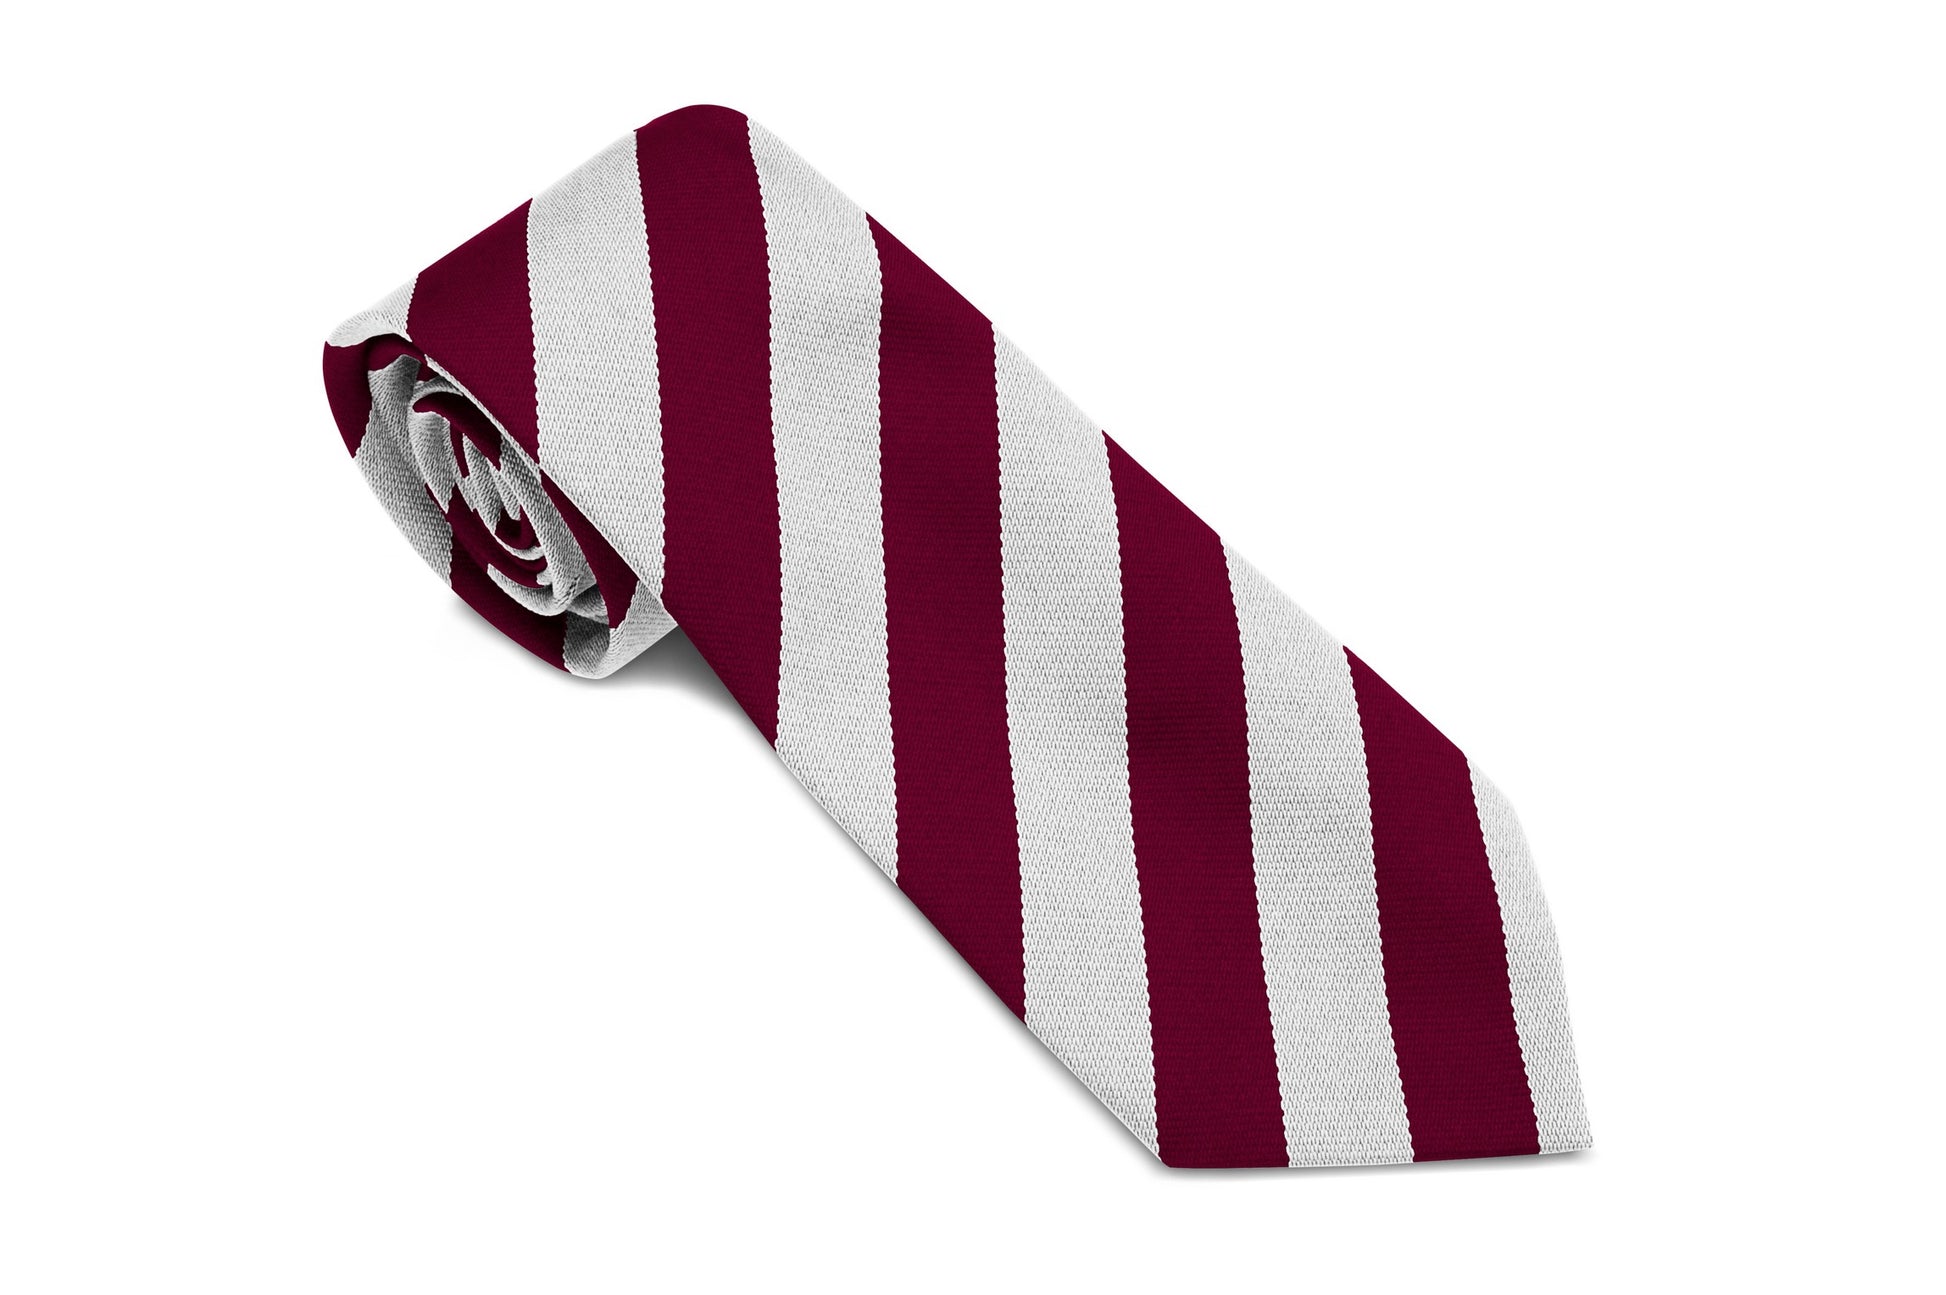 Stock Design Ties in Maroon and White Equal Stripe (5404-9507) - Lynendo Trade Store